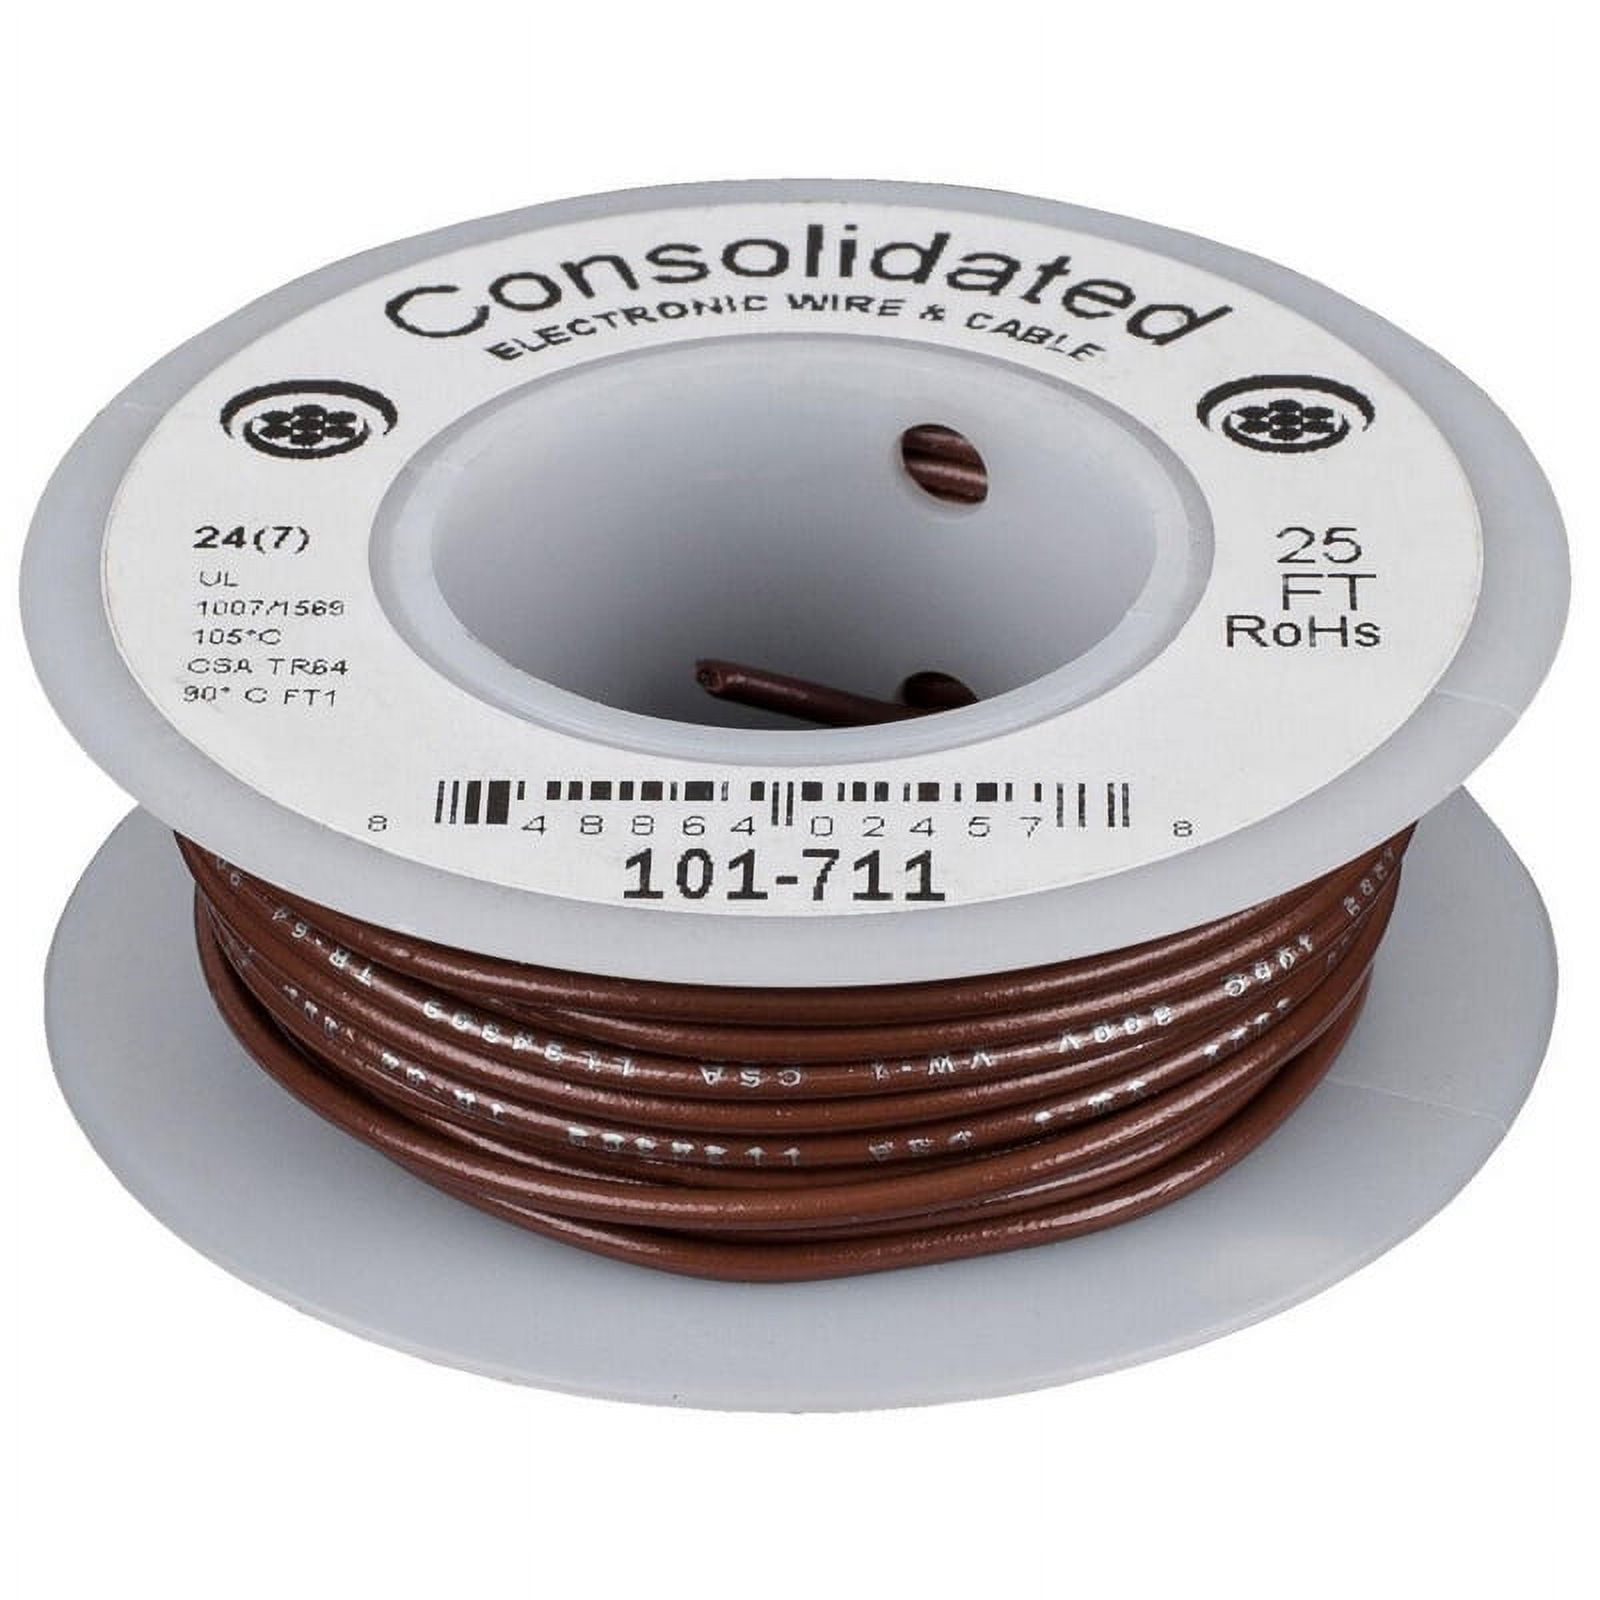 Consolidated Stranded 24 AWG Hook-Up Wire 25 ft. Red UL Rated 